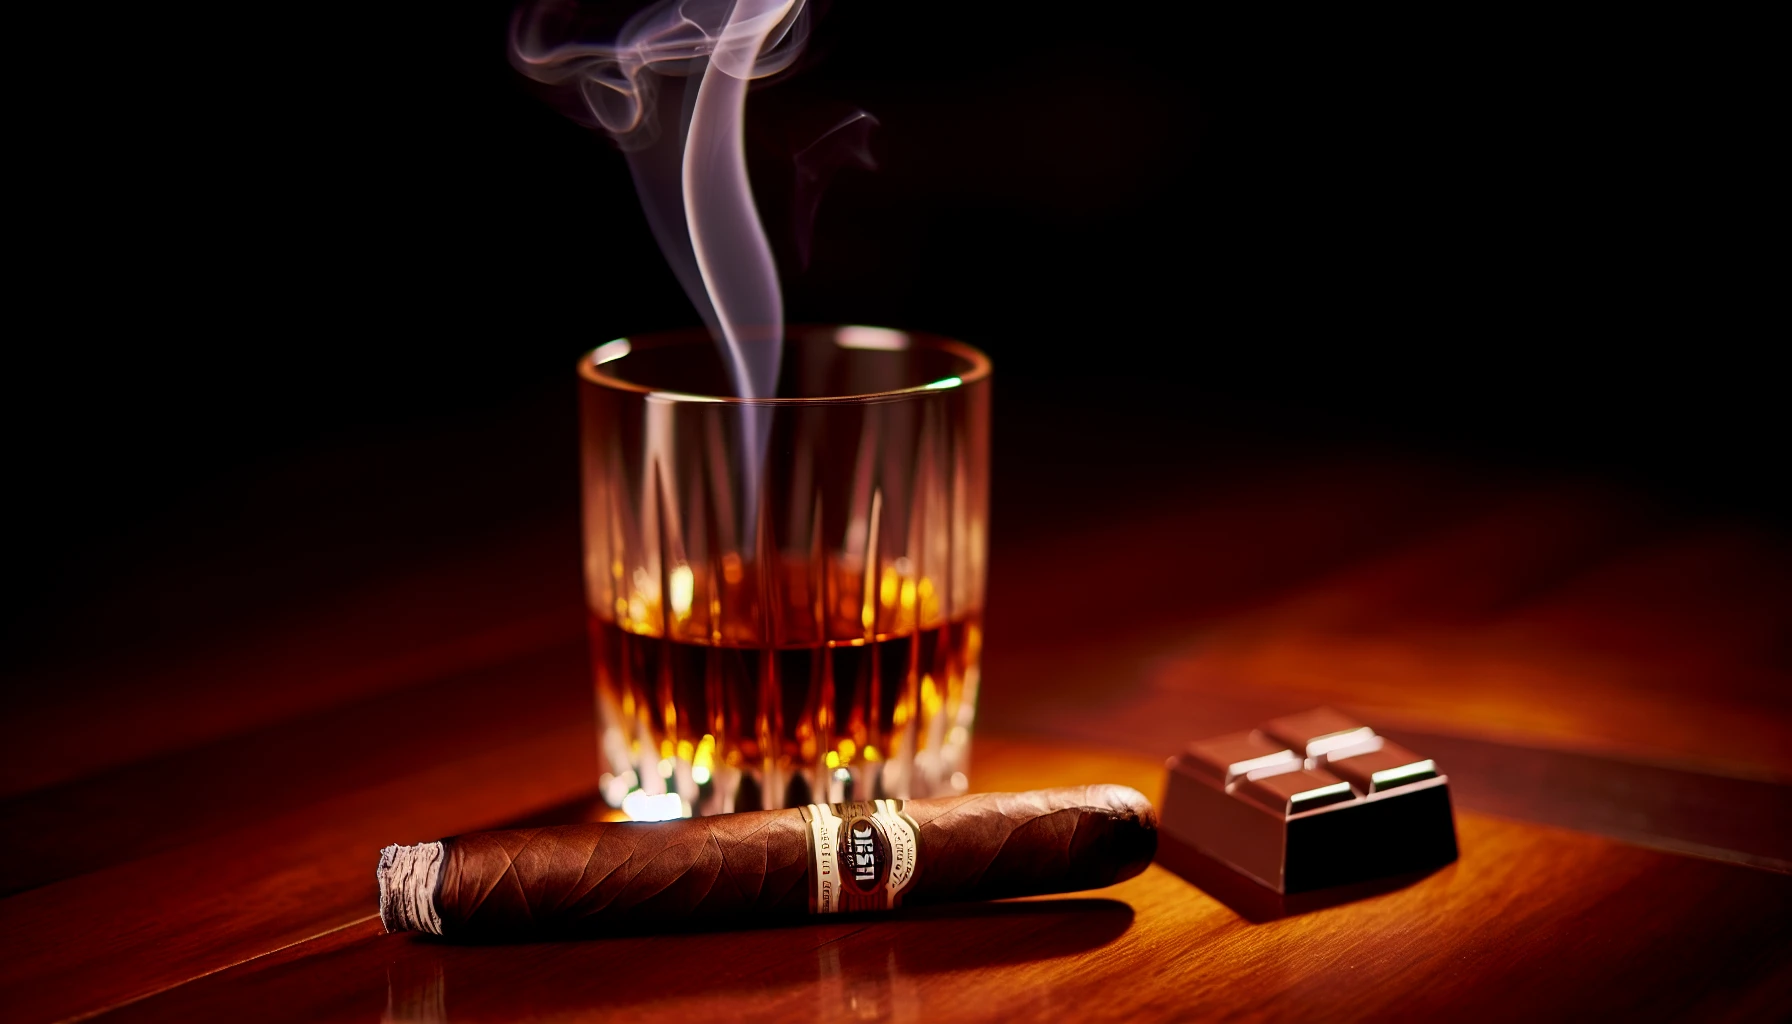 Elegant setup of a cigar, glass of bourbon, and dark chocolate on a wooden table